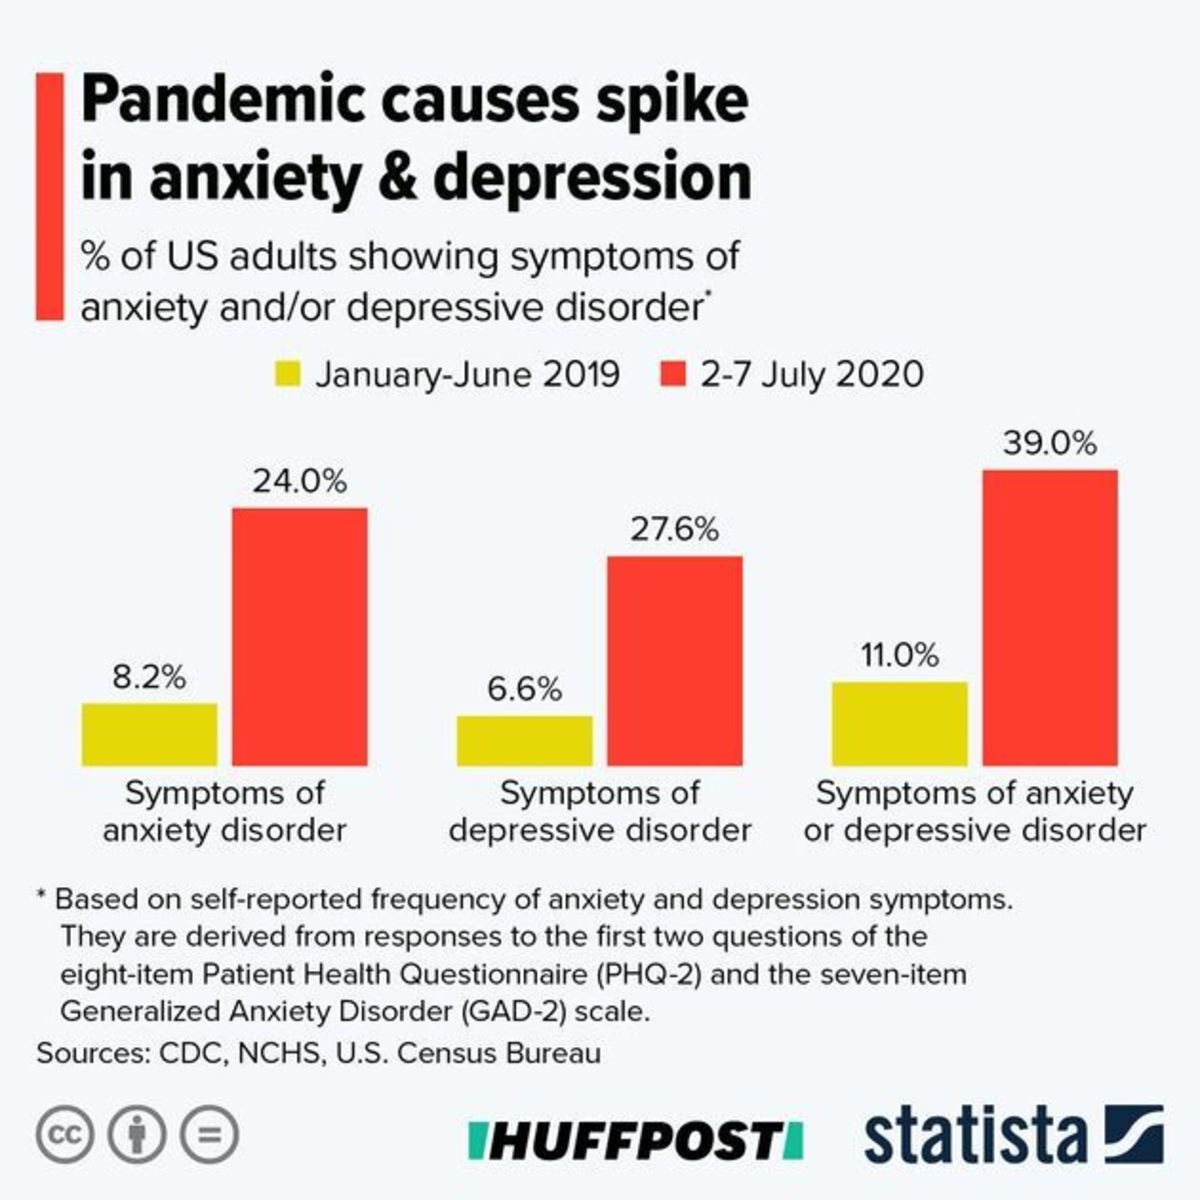 Originally posted by Huffpost. There appears to be a correlation between COVID 19 and the rise of anxiety disorders being reported. It's undetermined if a majority of these cases are social anxiety disorders. 